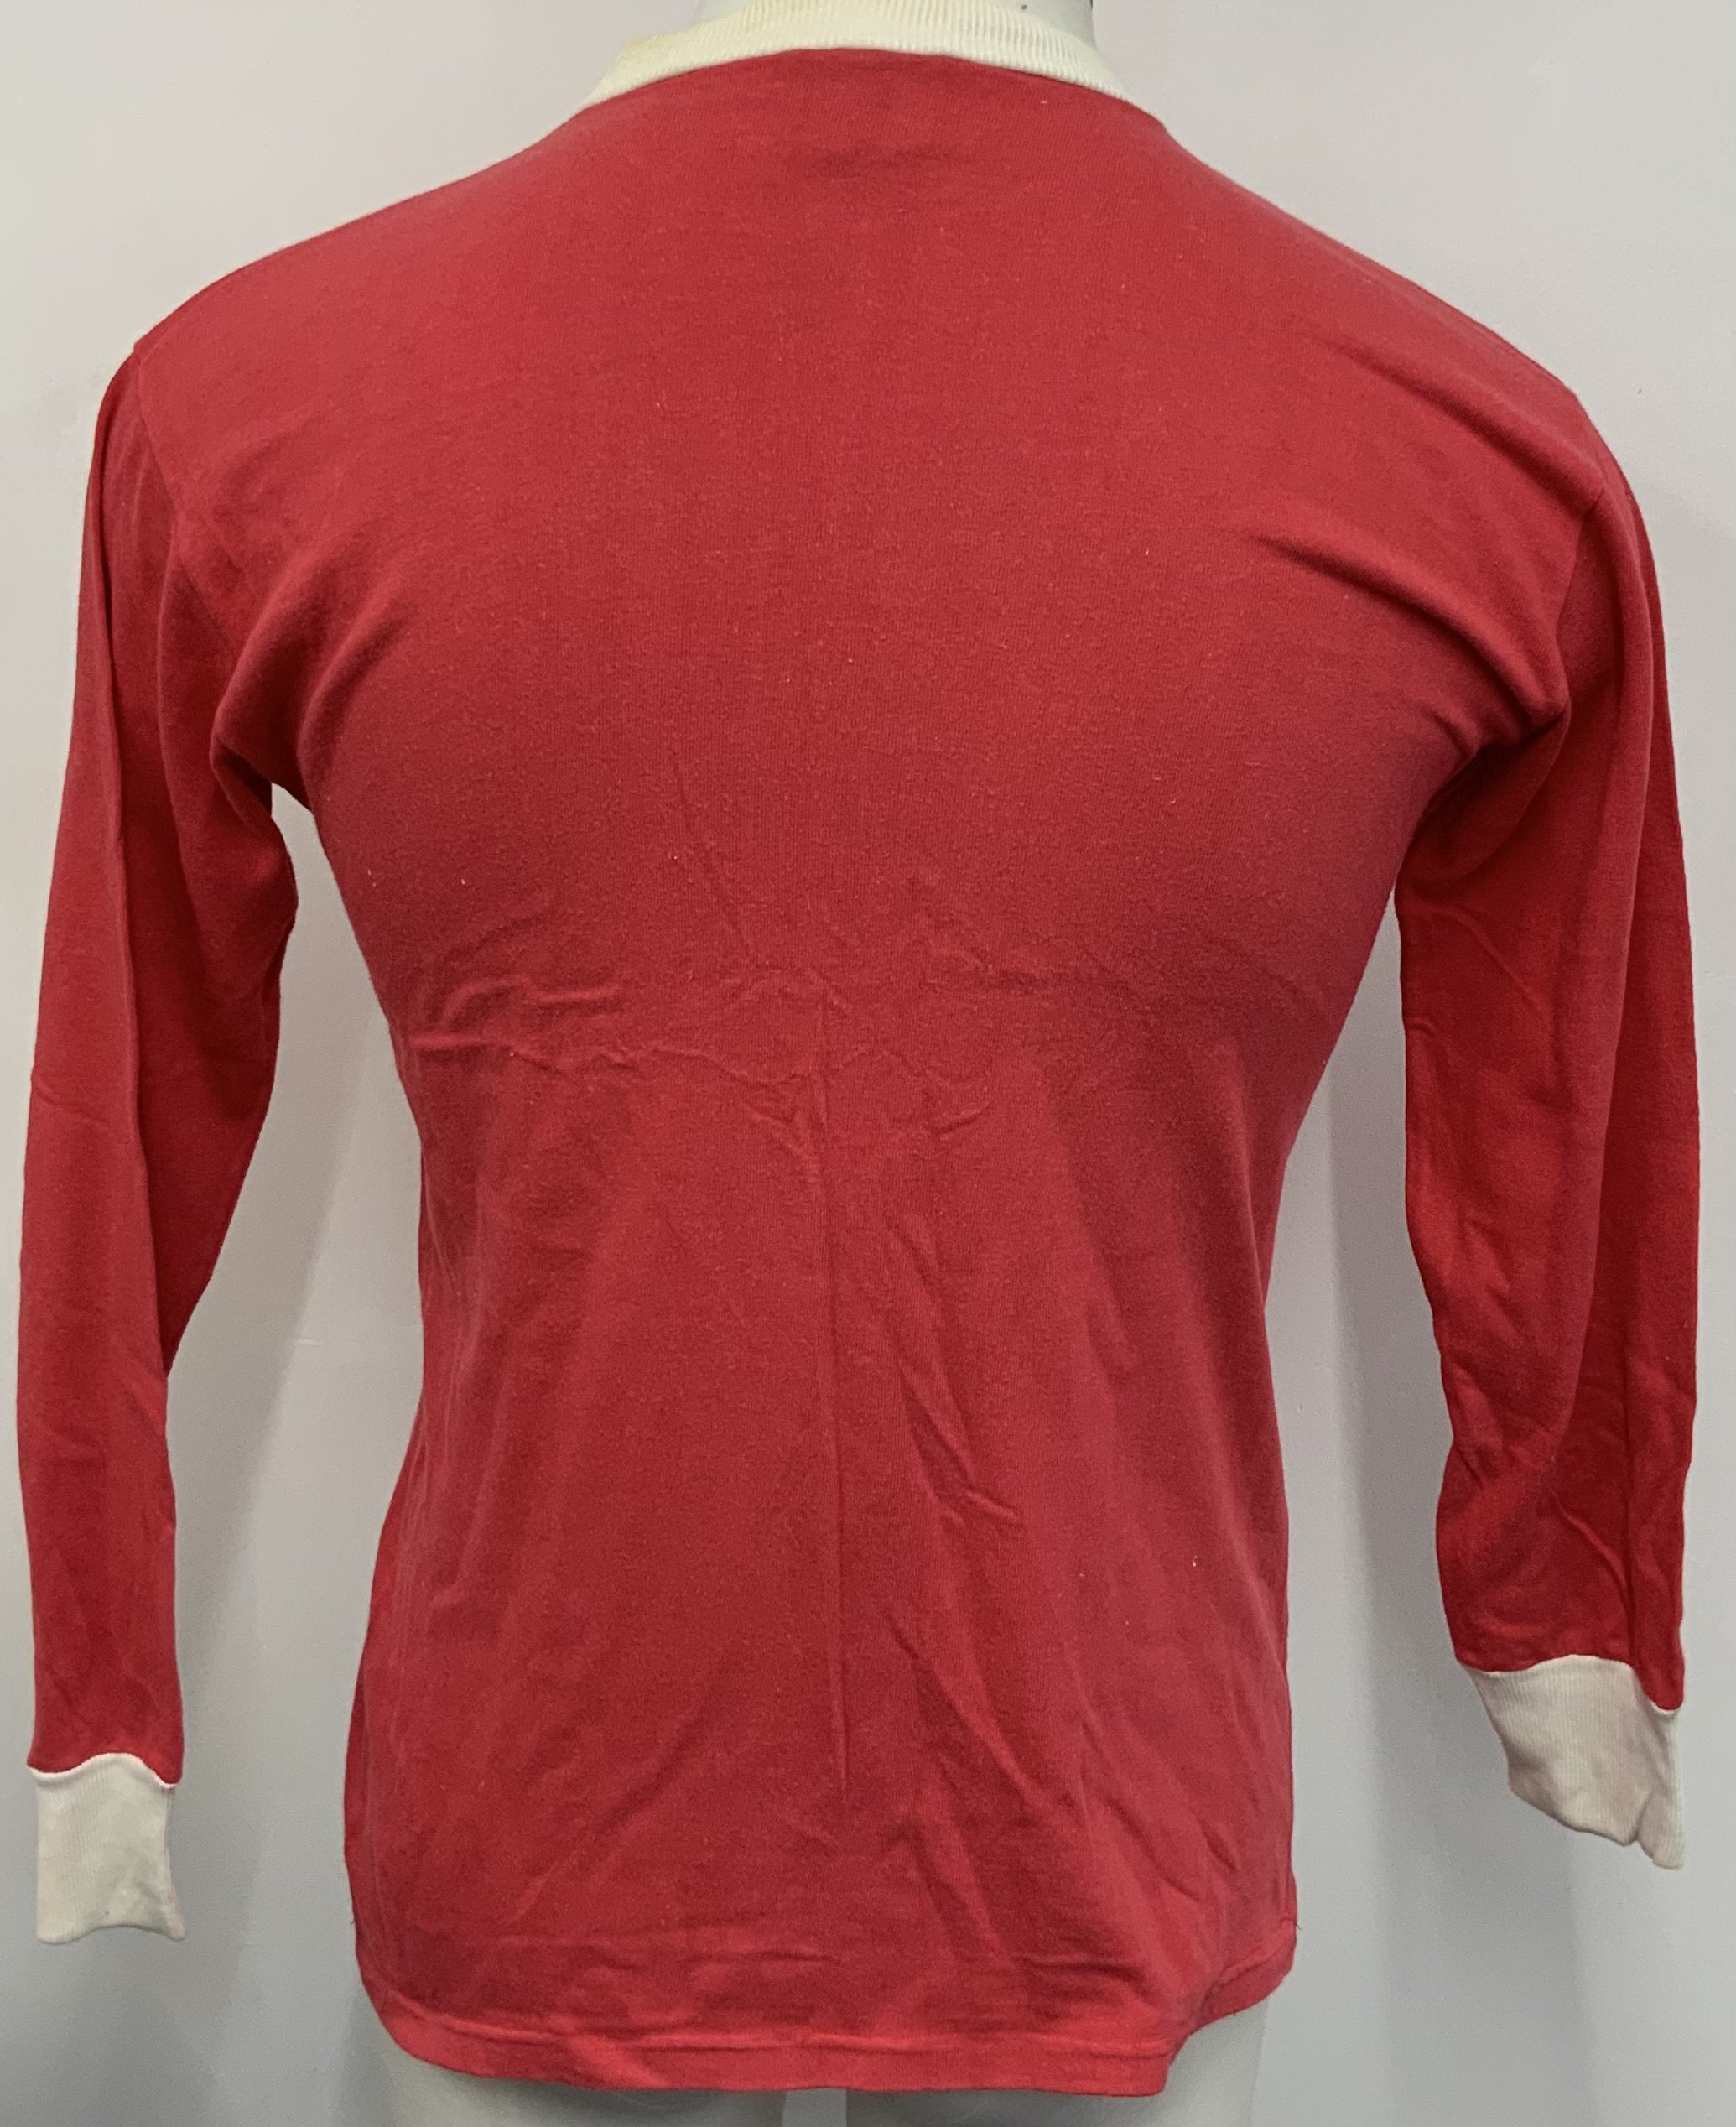 Switzerland Football Shirt: Red long sleeve with w - Image 2 of 3